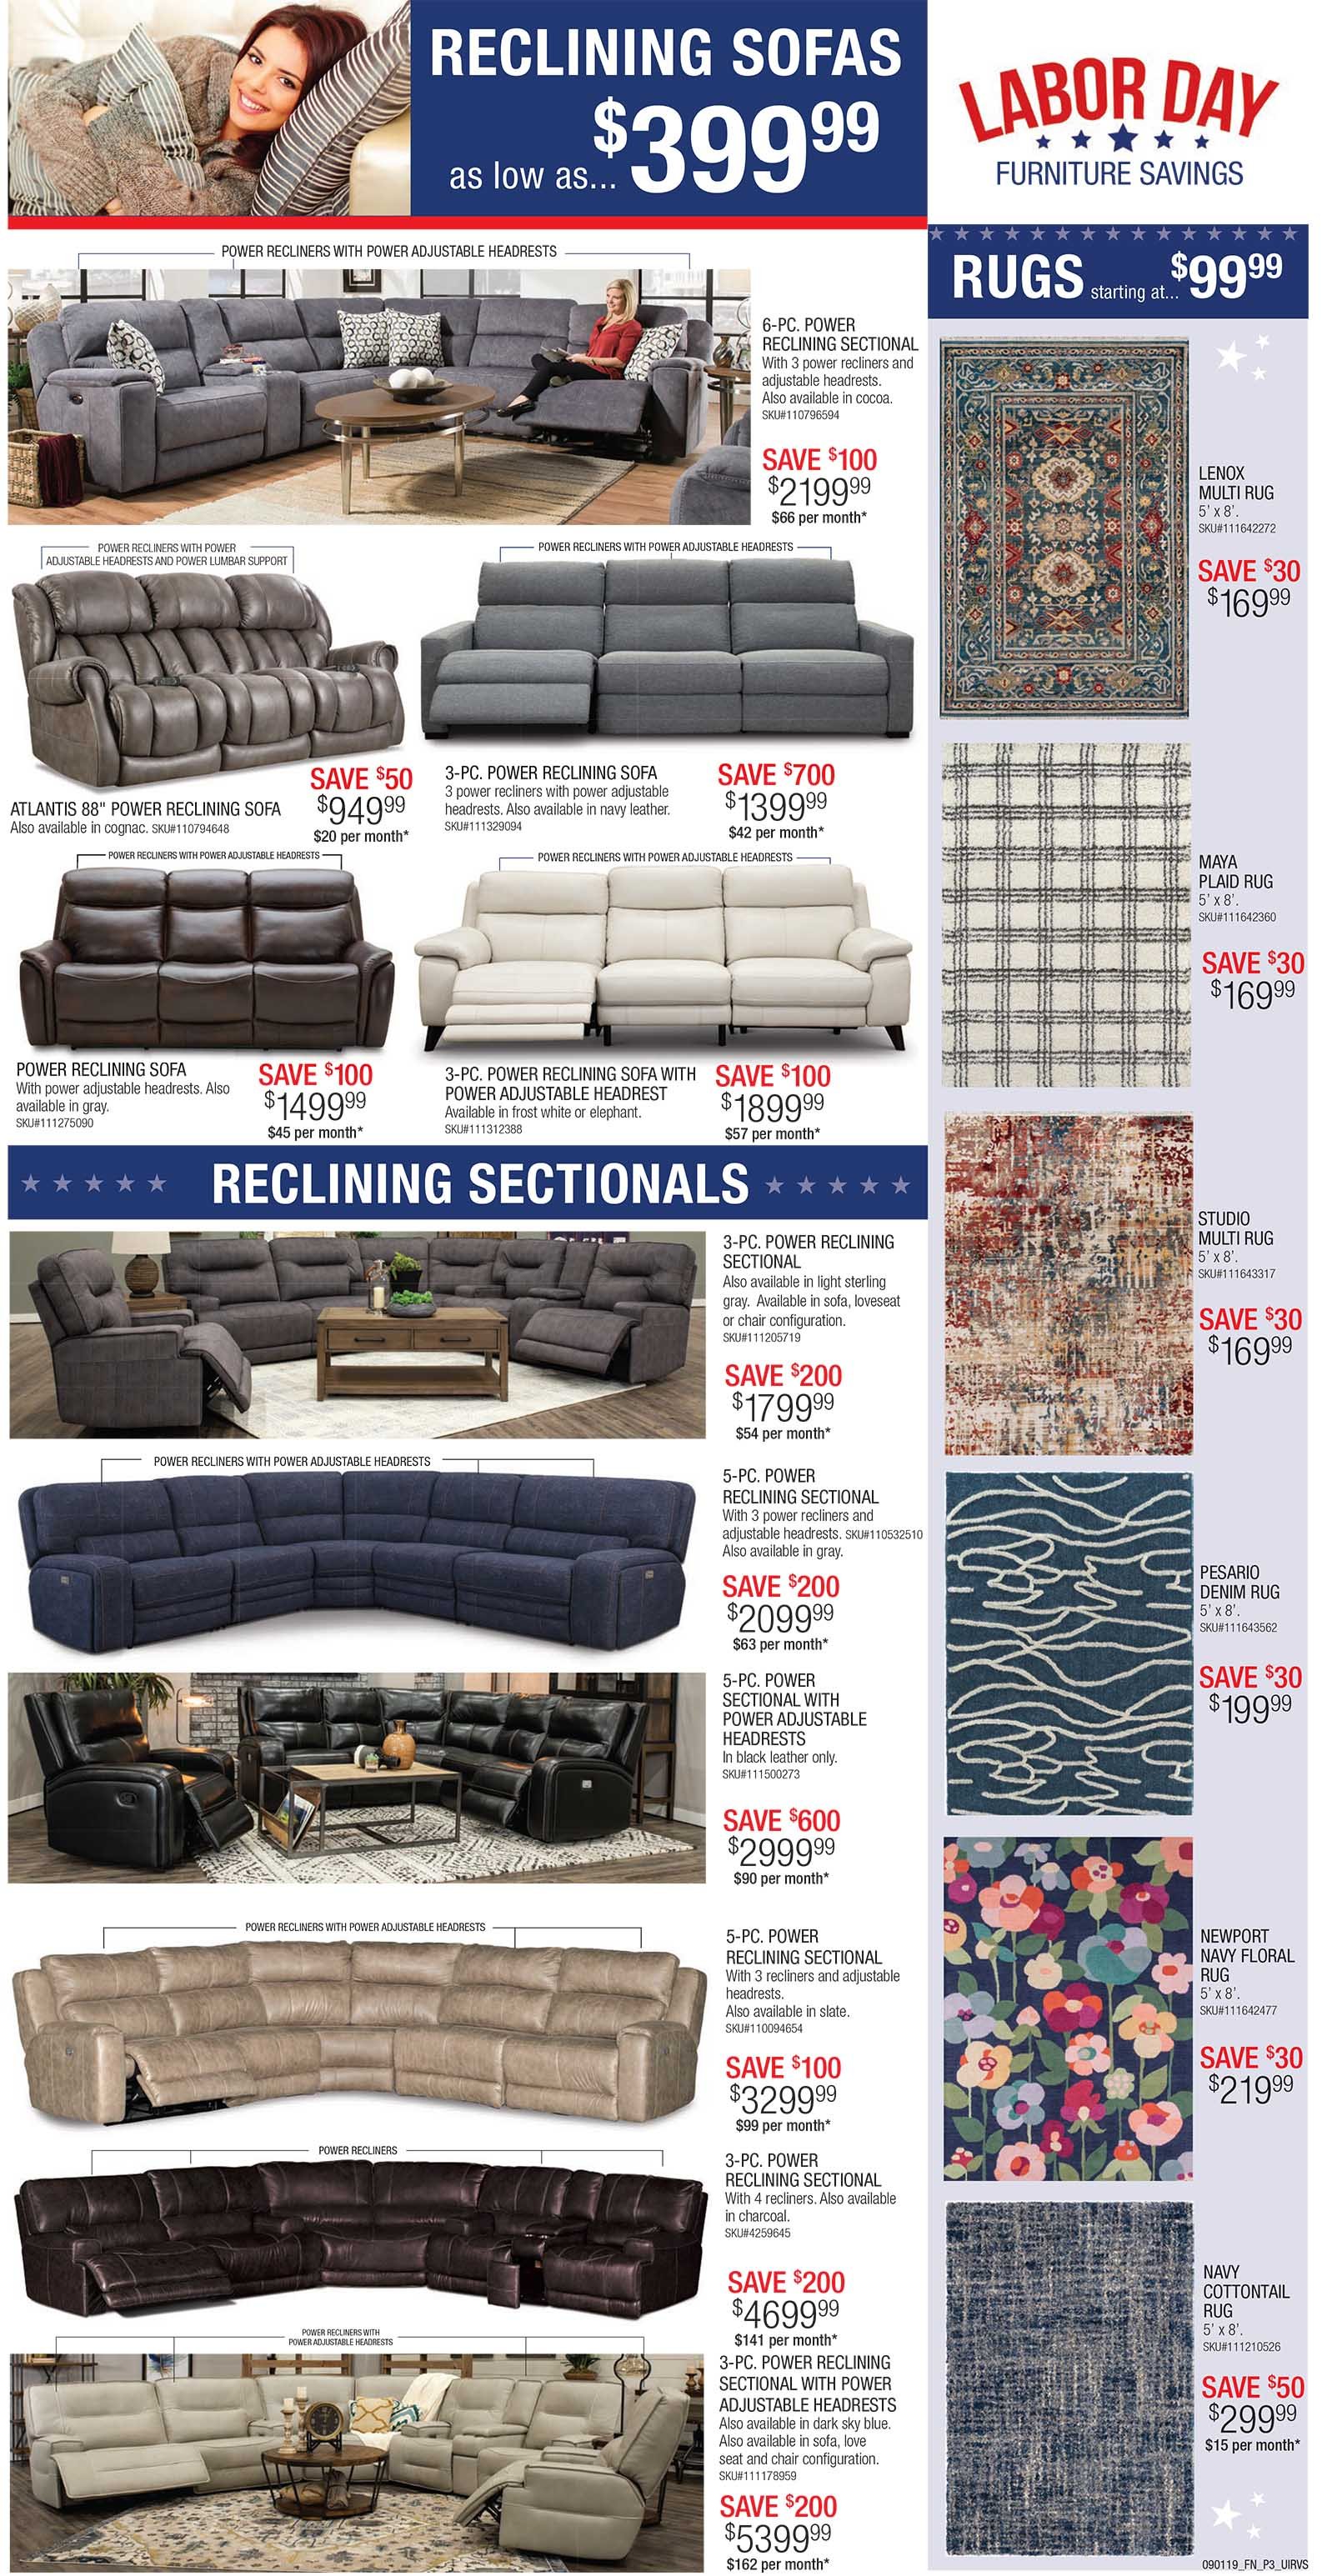 Labor Day Home Furnishings Sale at RC Willey! Plus DOORBUSTERS!!